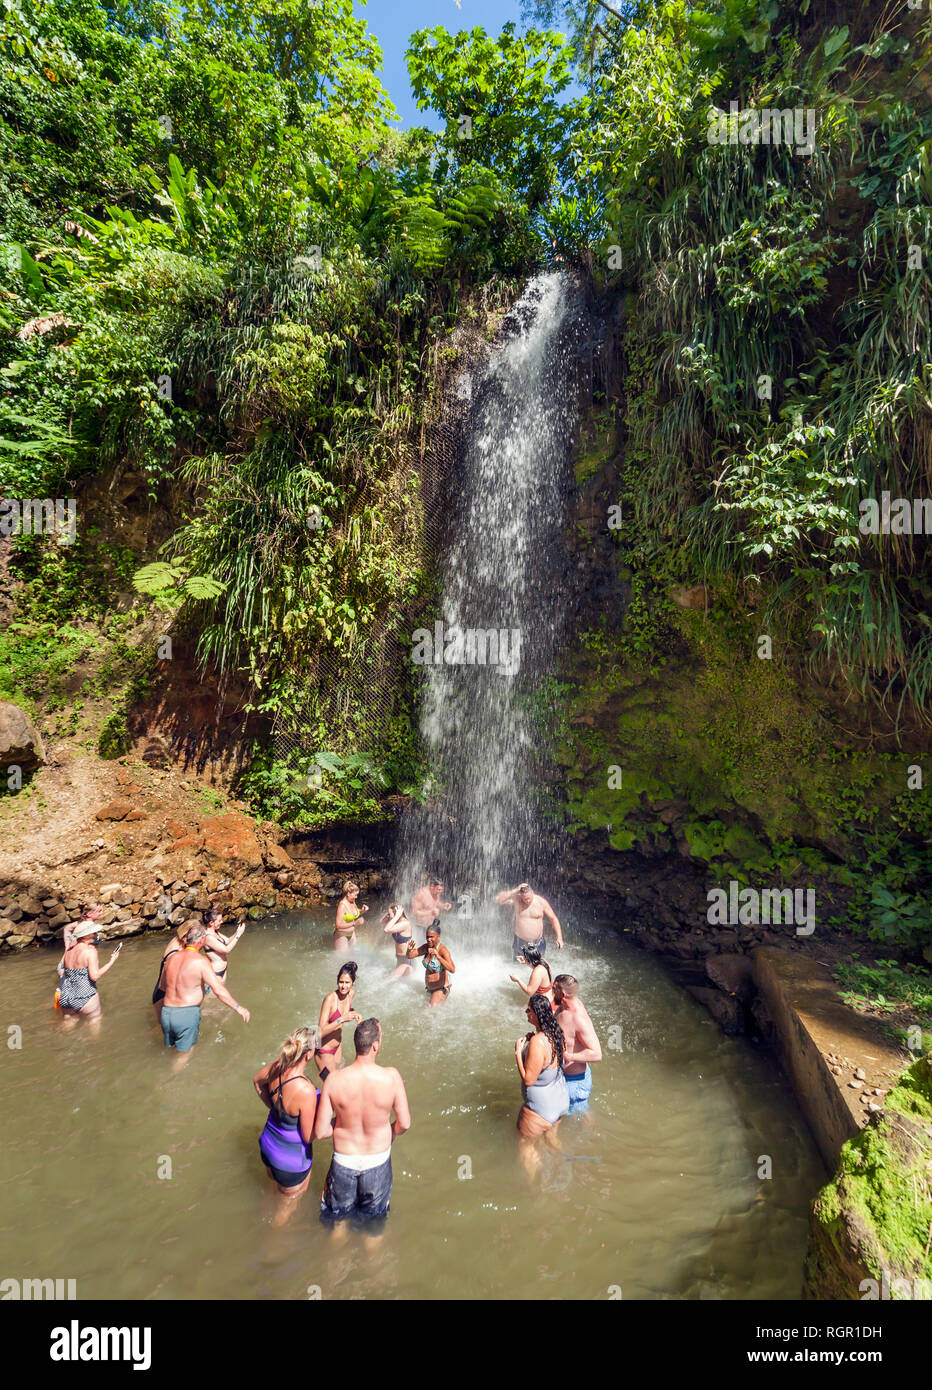 Waterfall at the Botanical Gardens, Soufriere, Saint Lucia. Stock Photo